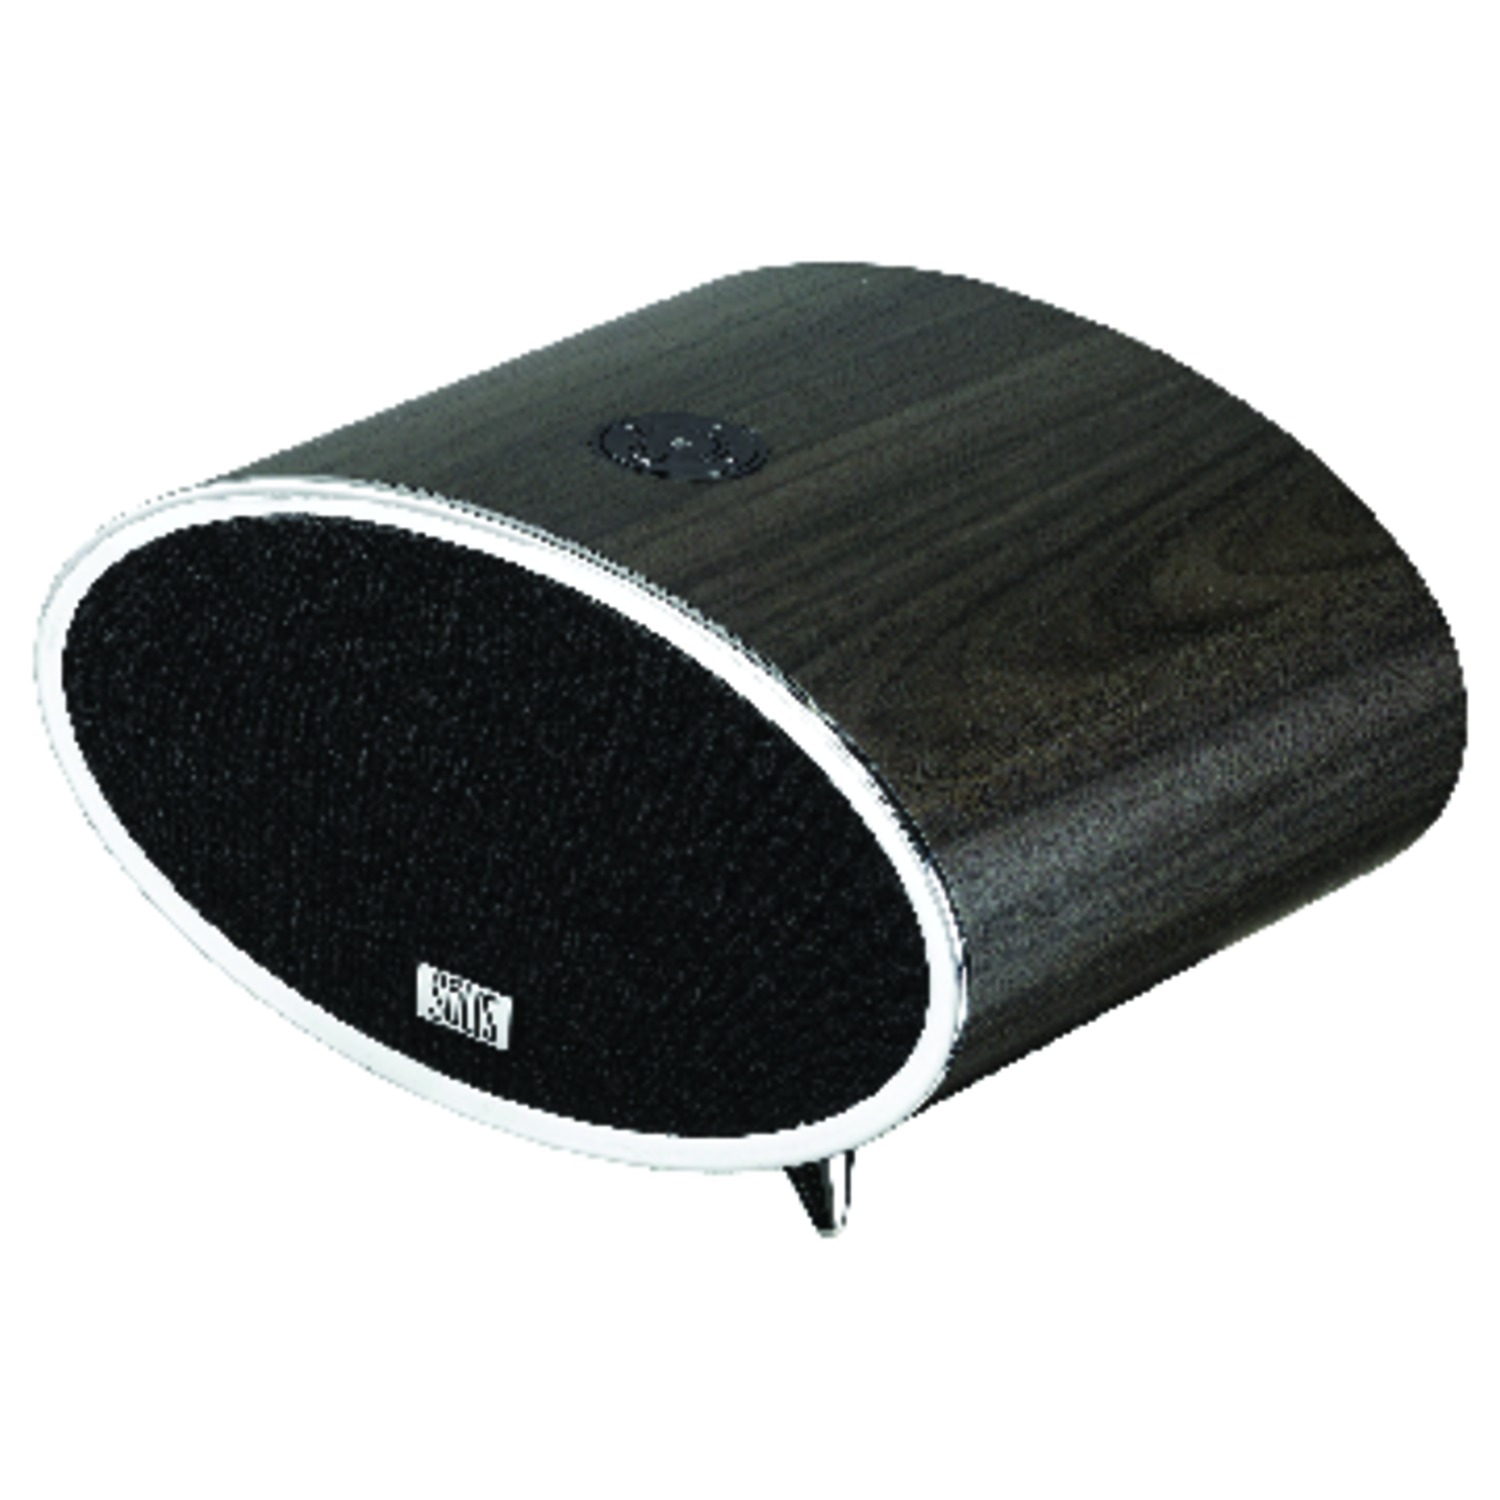 Solis SO-6000 Bluetooth/Wi-Fi Wireless Stereo Smart Speaker with Chromecast Built-in - image 3 of 7